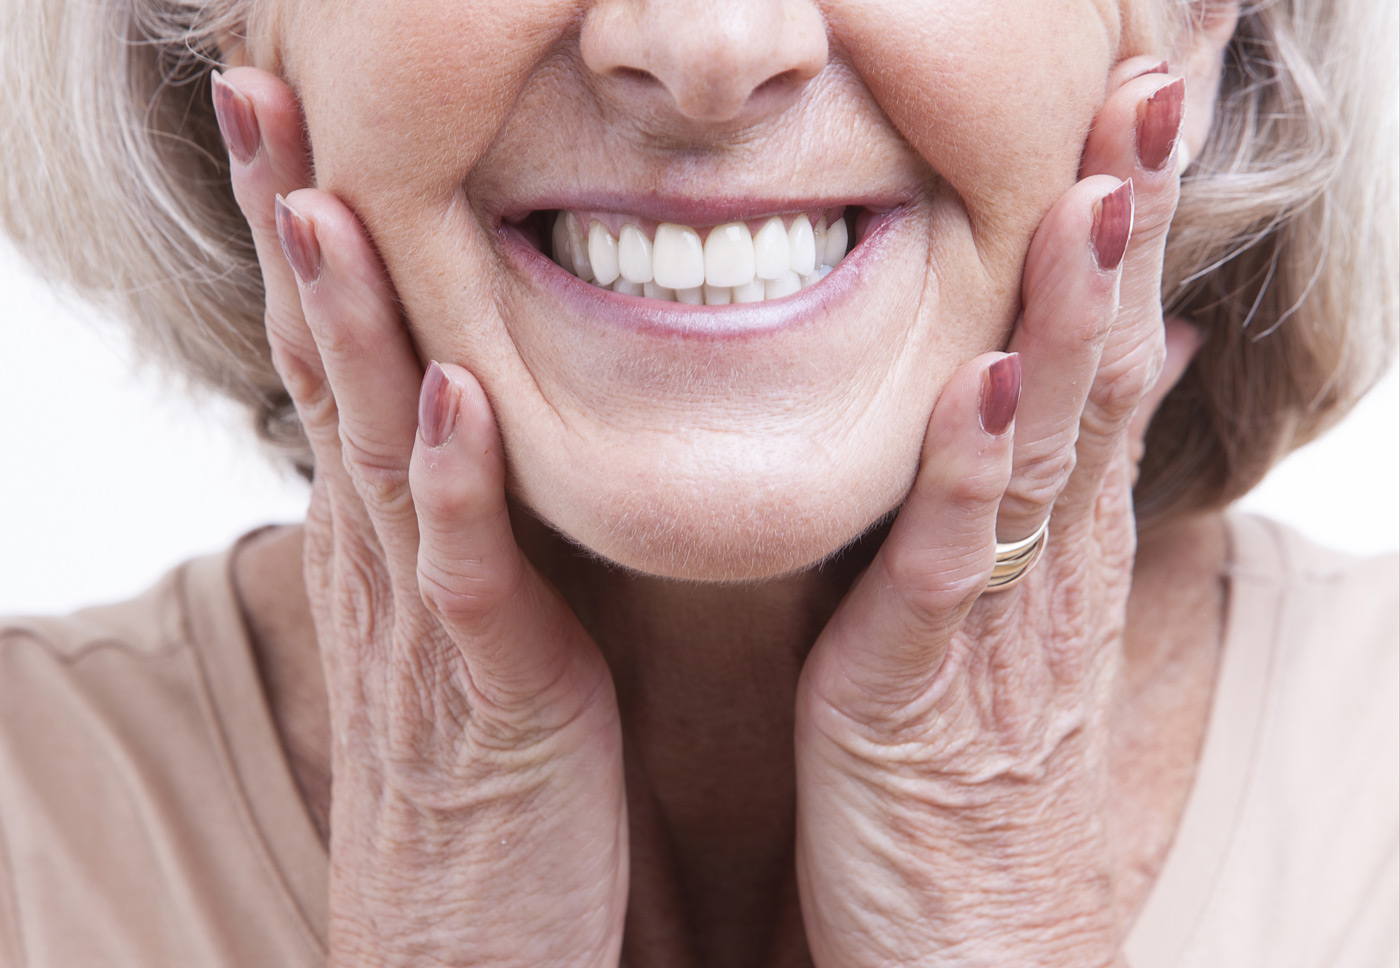 An elderly woman grimacing with clenched teeth, hands pressed against her cheeks, expressing bruxism.